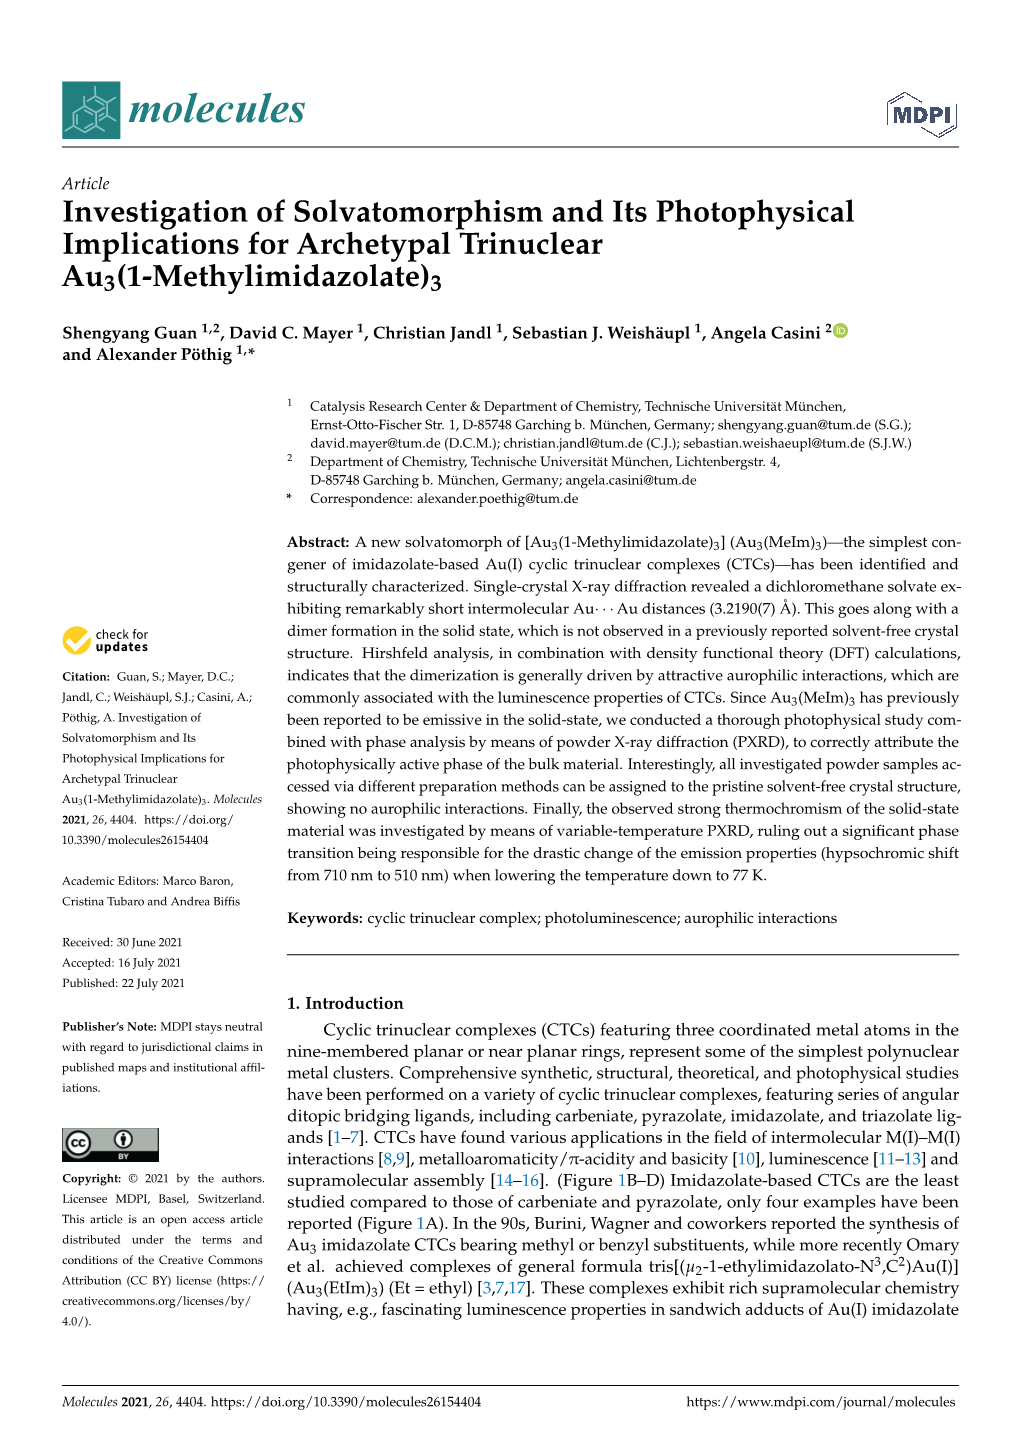 Investigation of Solvatomorphism and Its Photophysical Implications for Archetypal Trinuclear Au3(1-Methylimidazolate)3